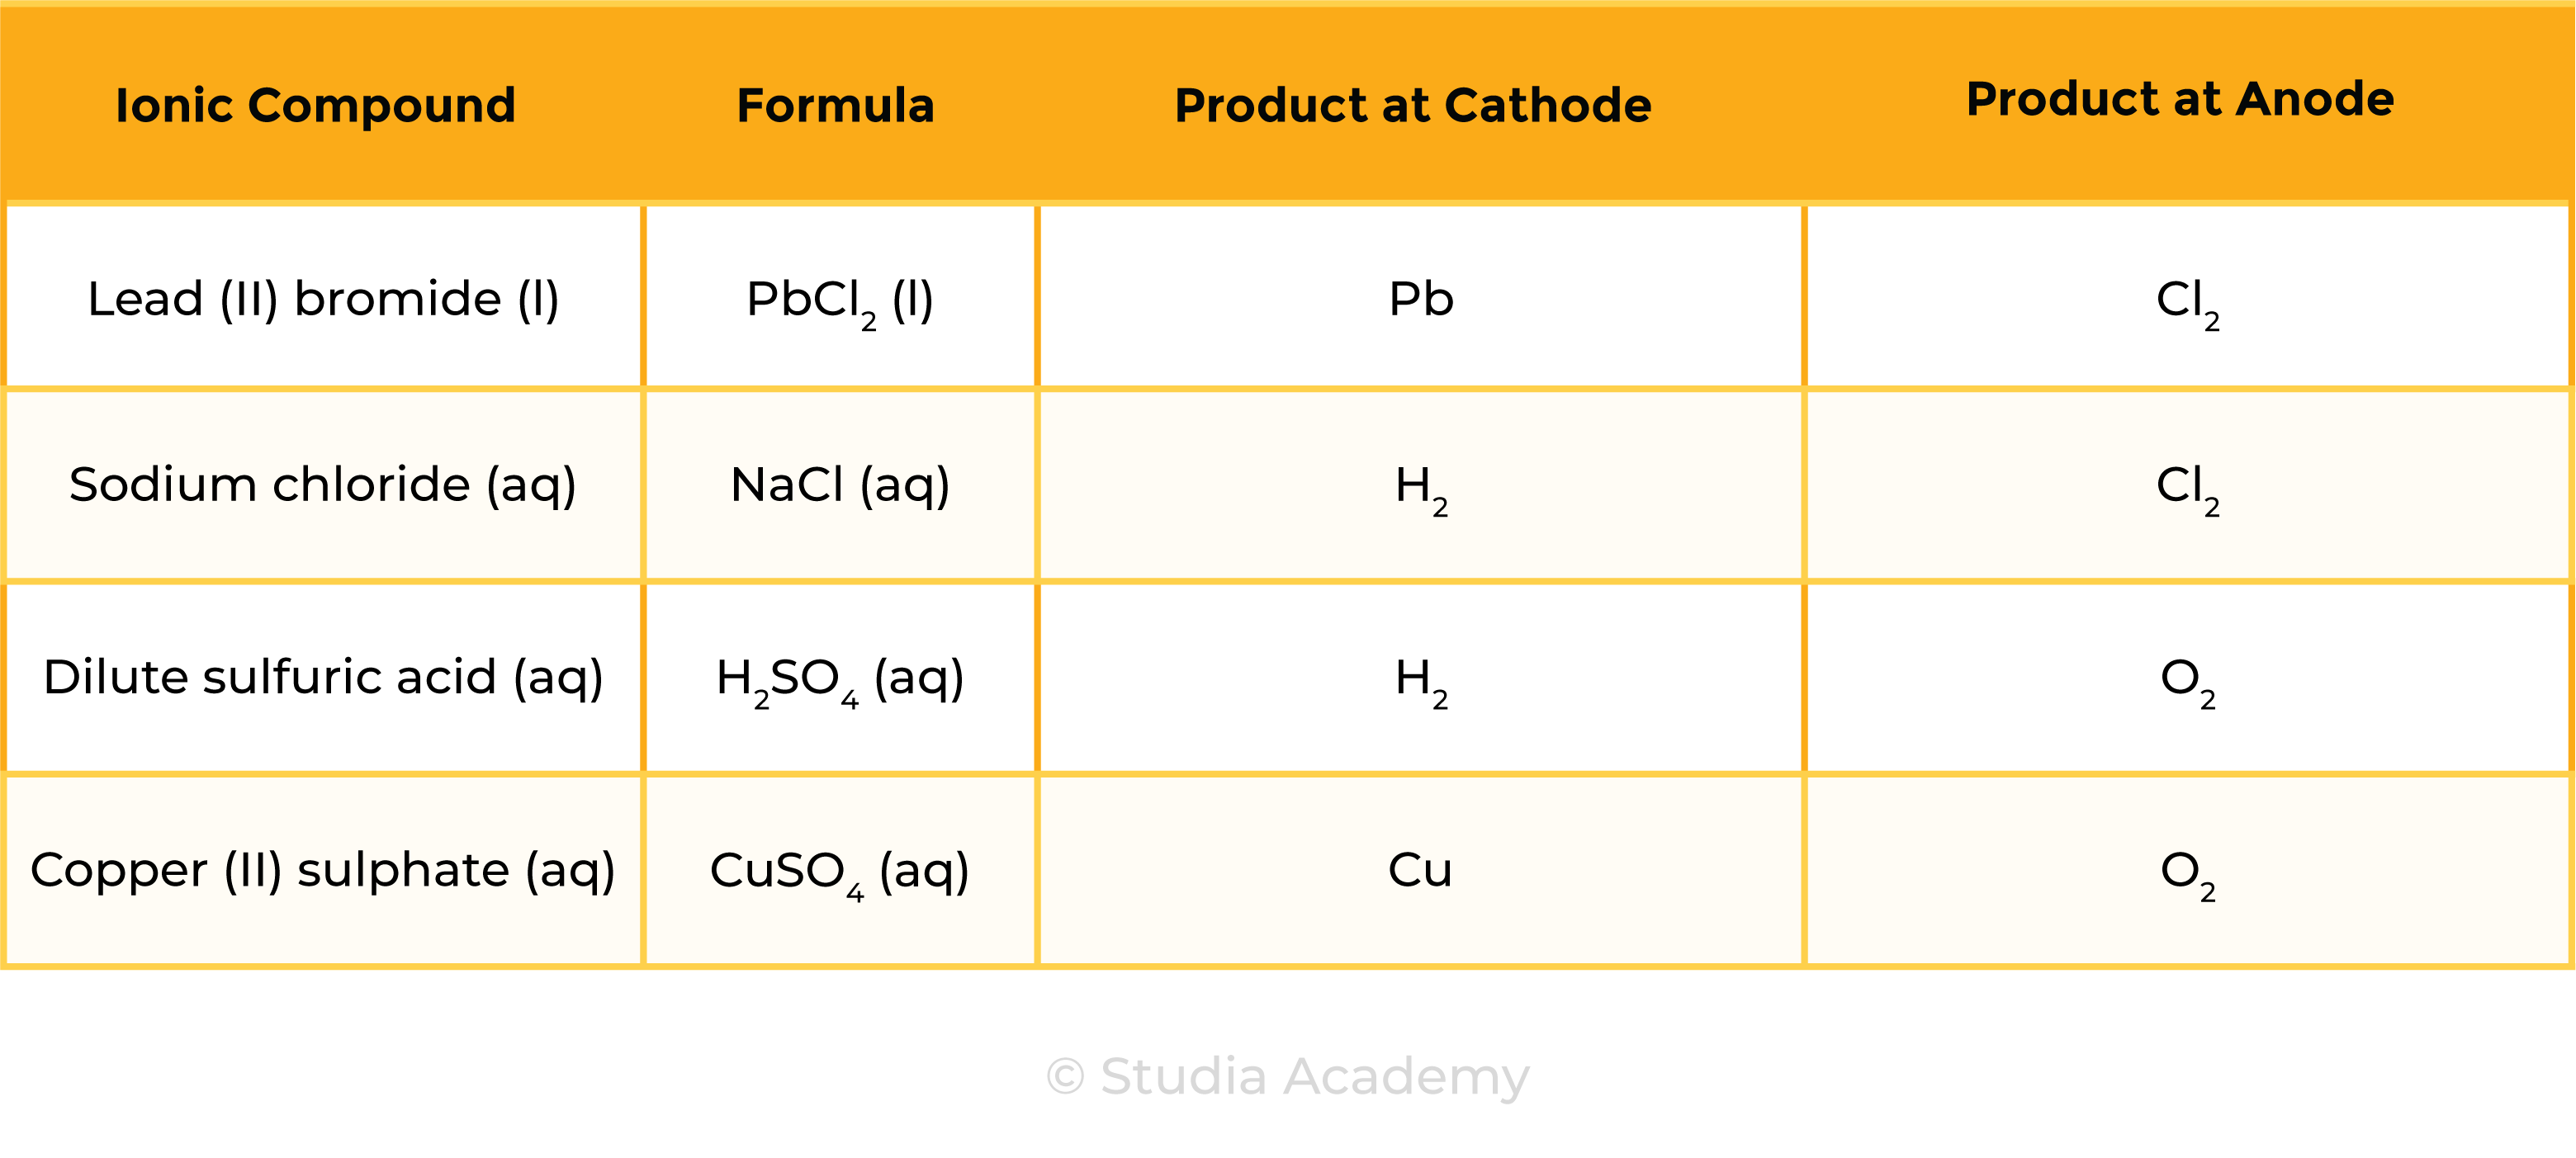 edexcel_igcse_chemistry_topic 09 tables_electrolysis_004_summary of product at cathode and anode for example compounds